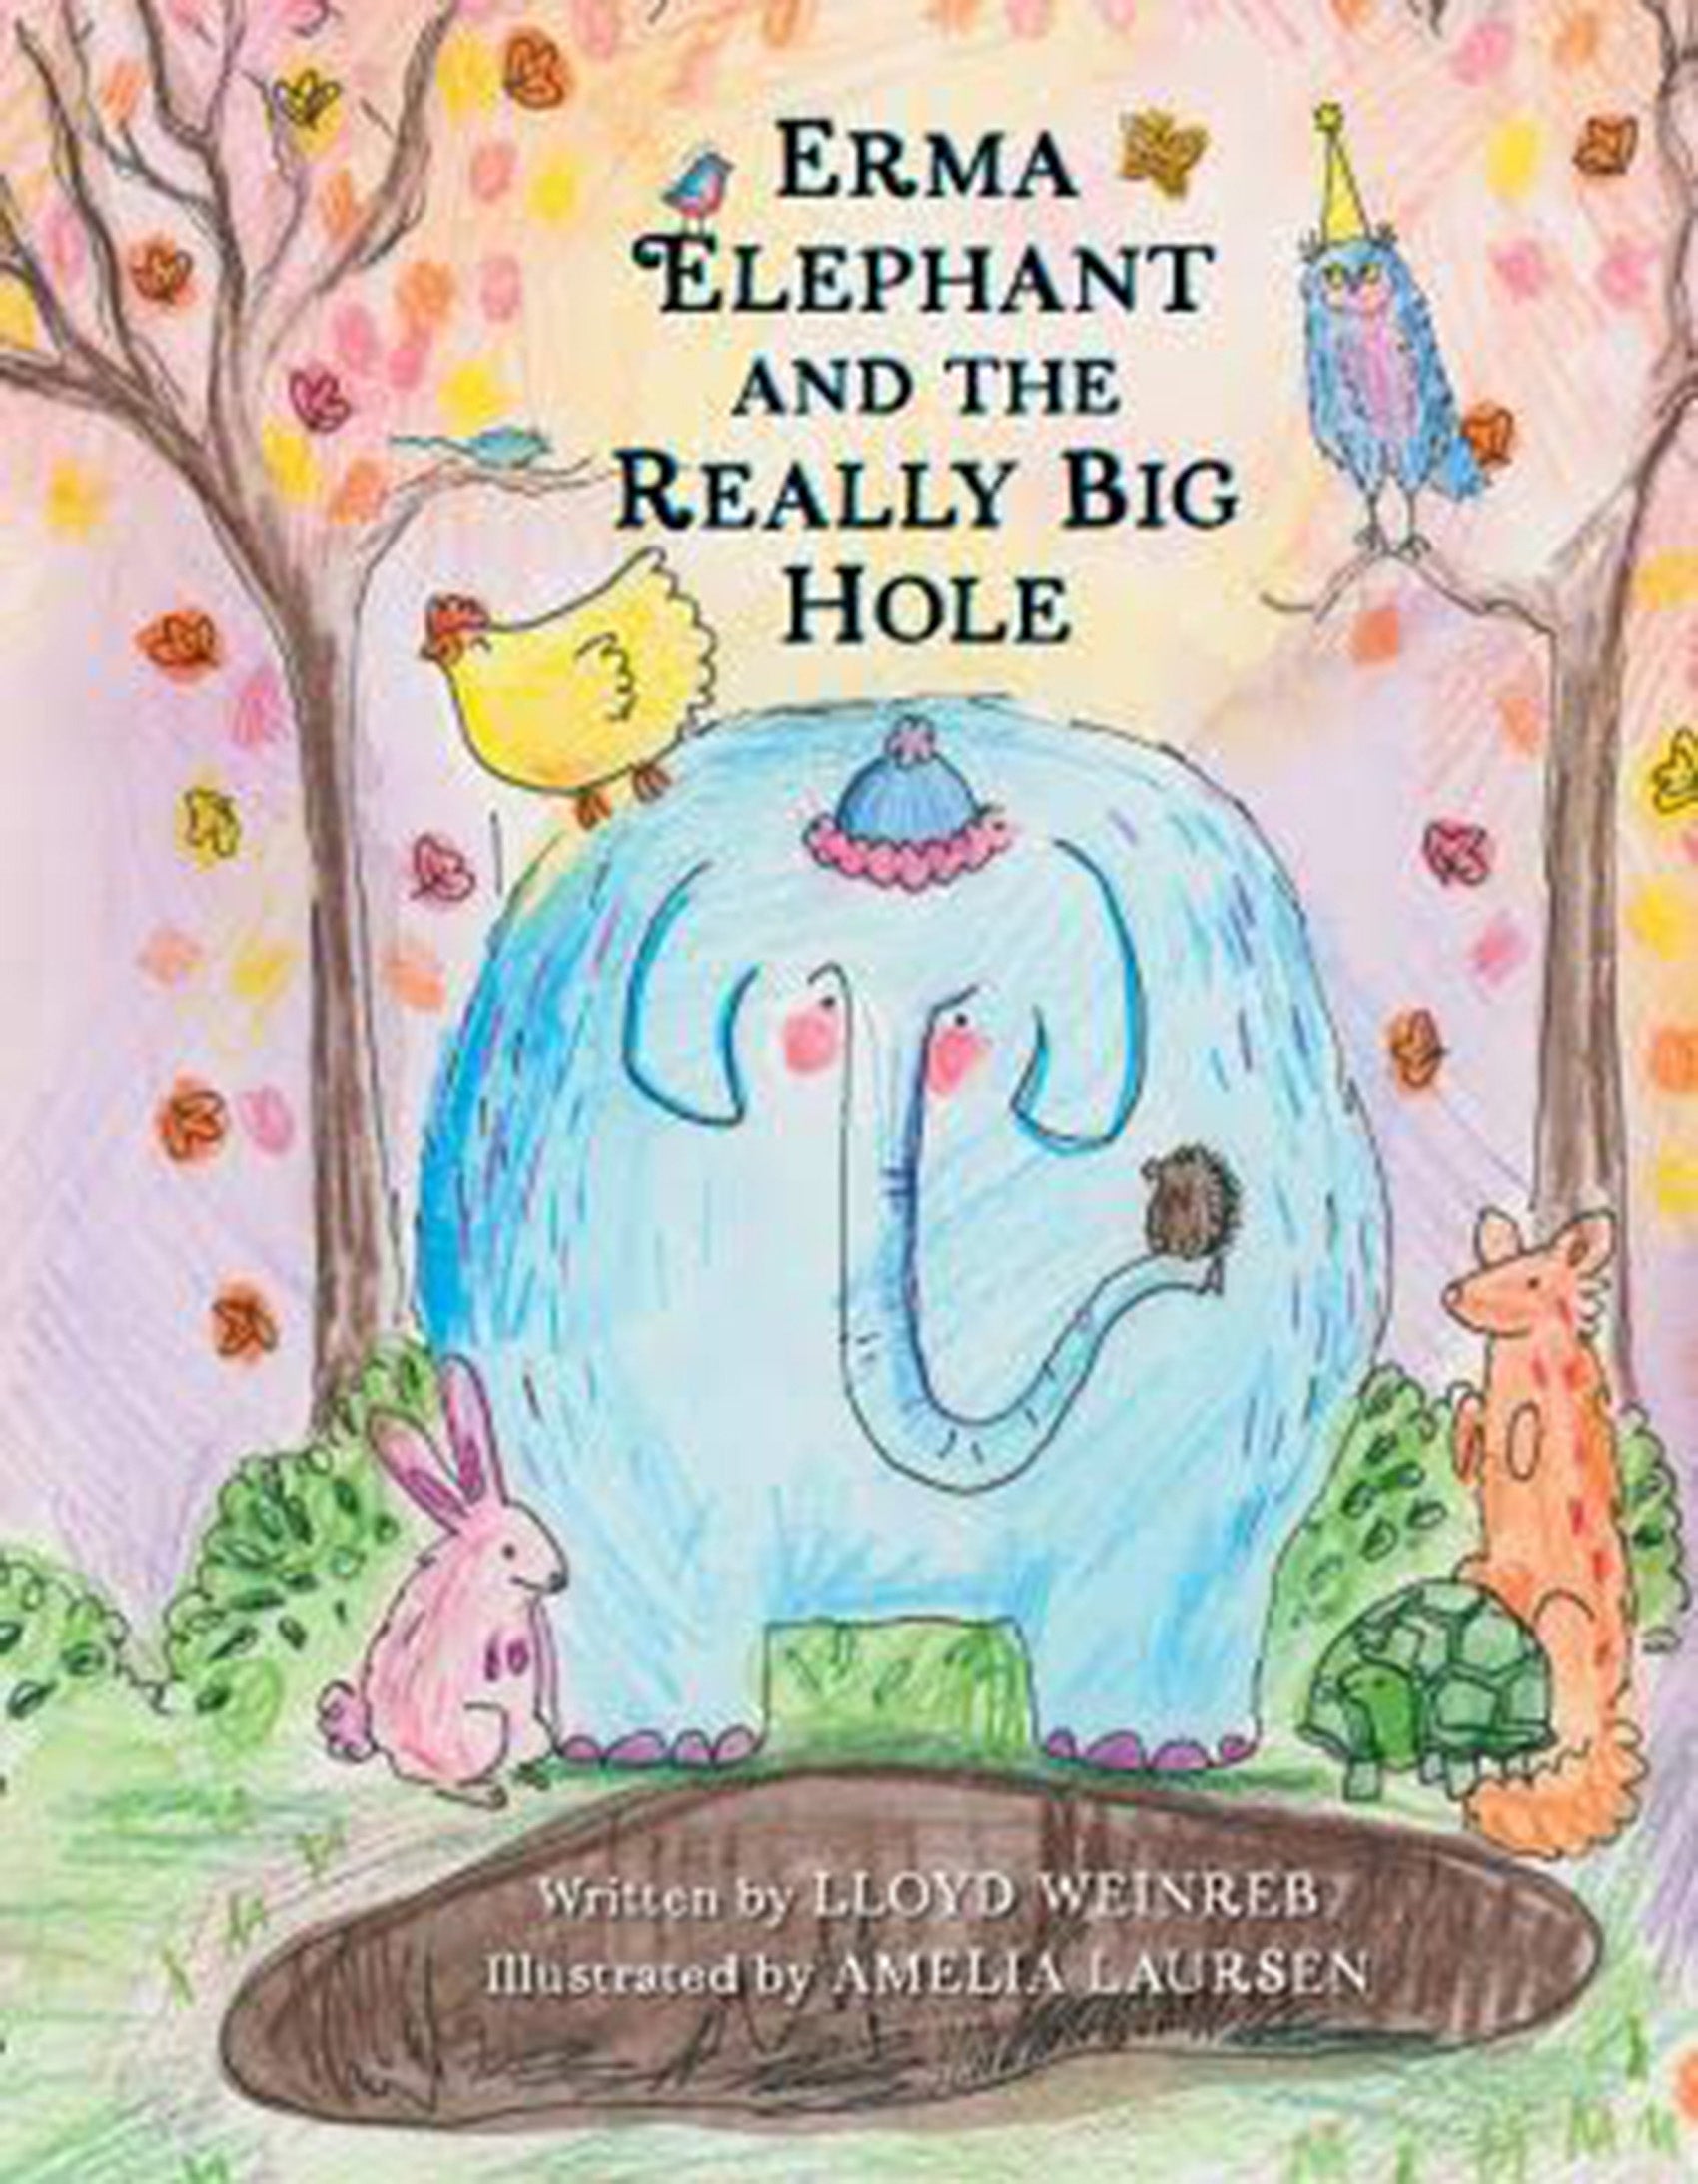 A book cover illustration featuring a large elephant and small creatures standing near a large hole